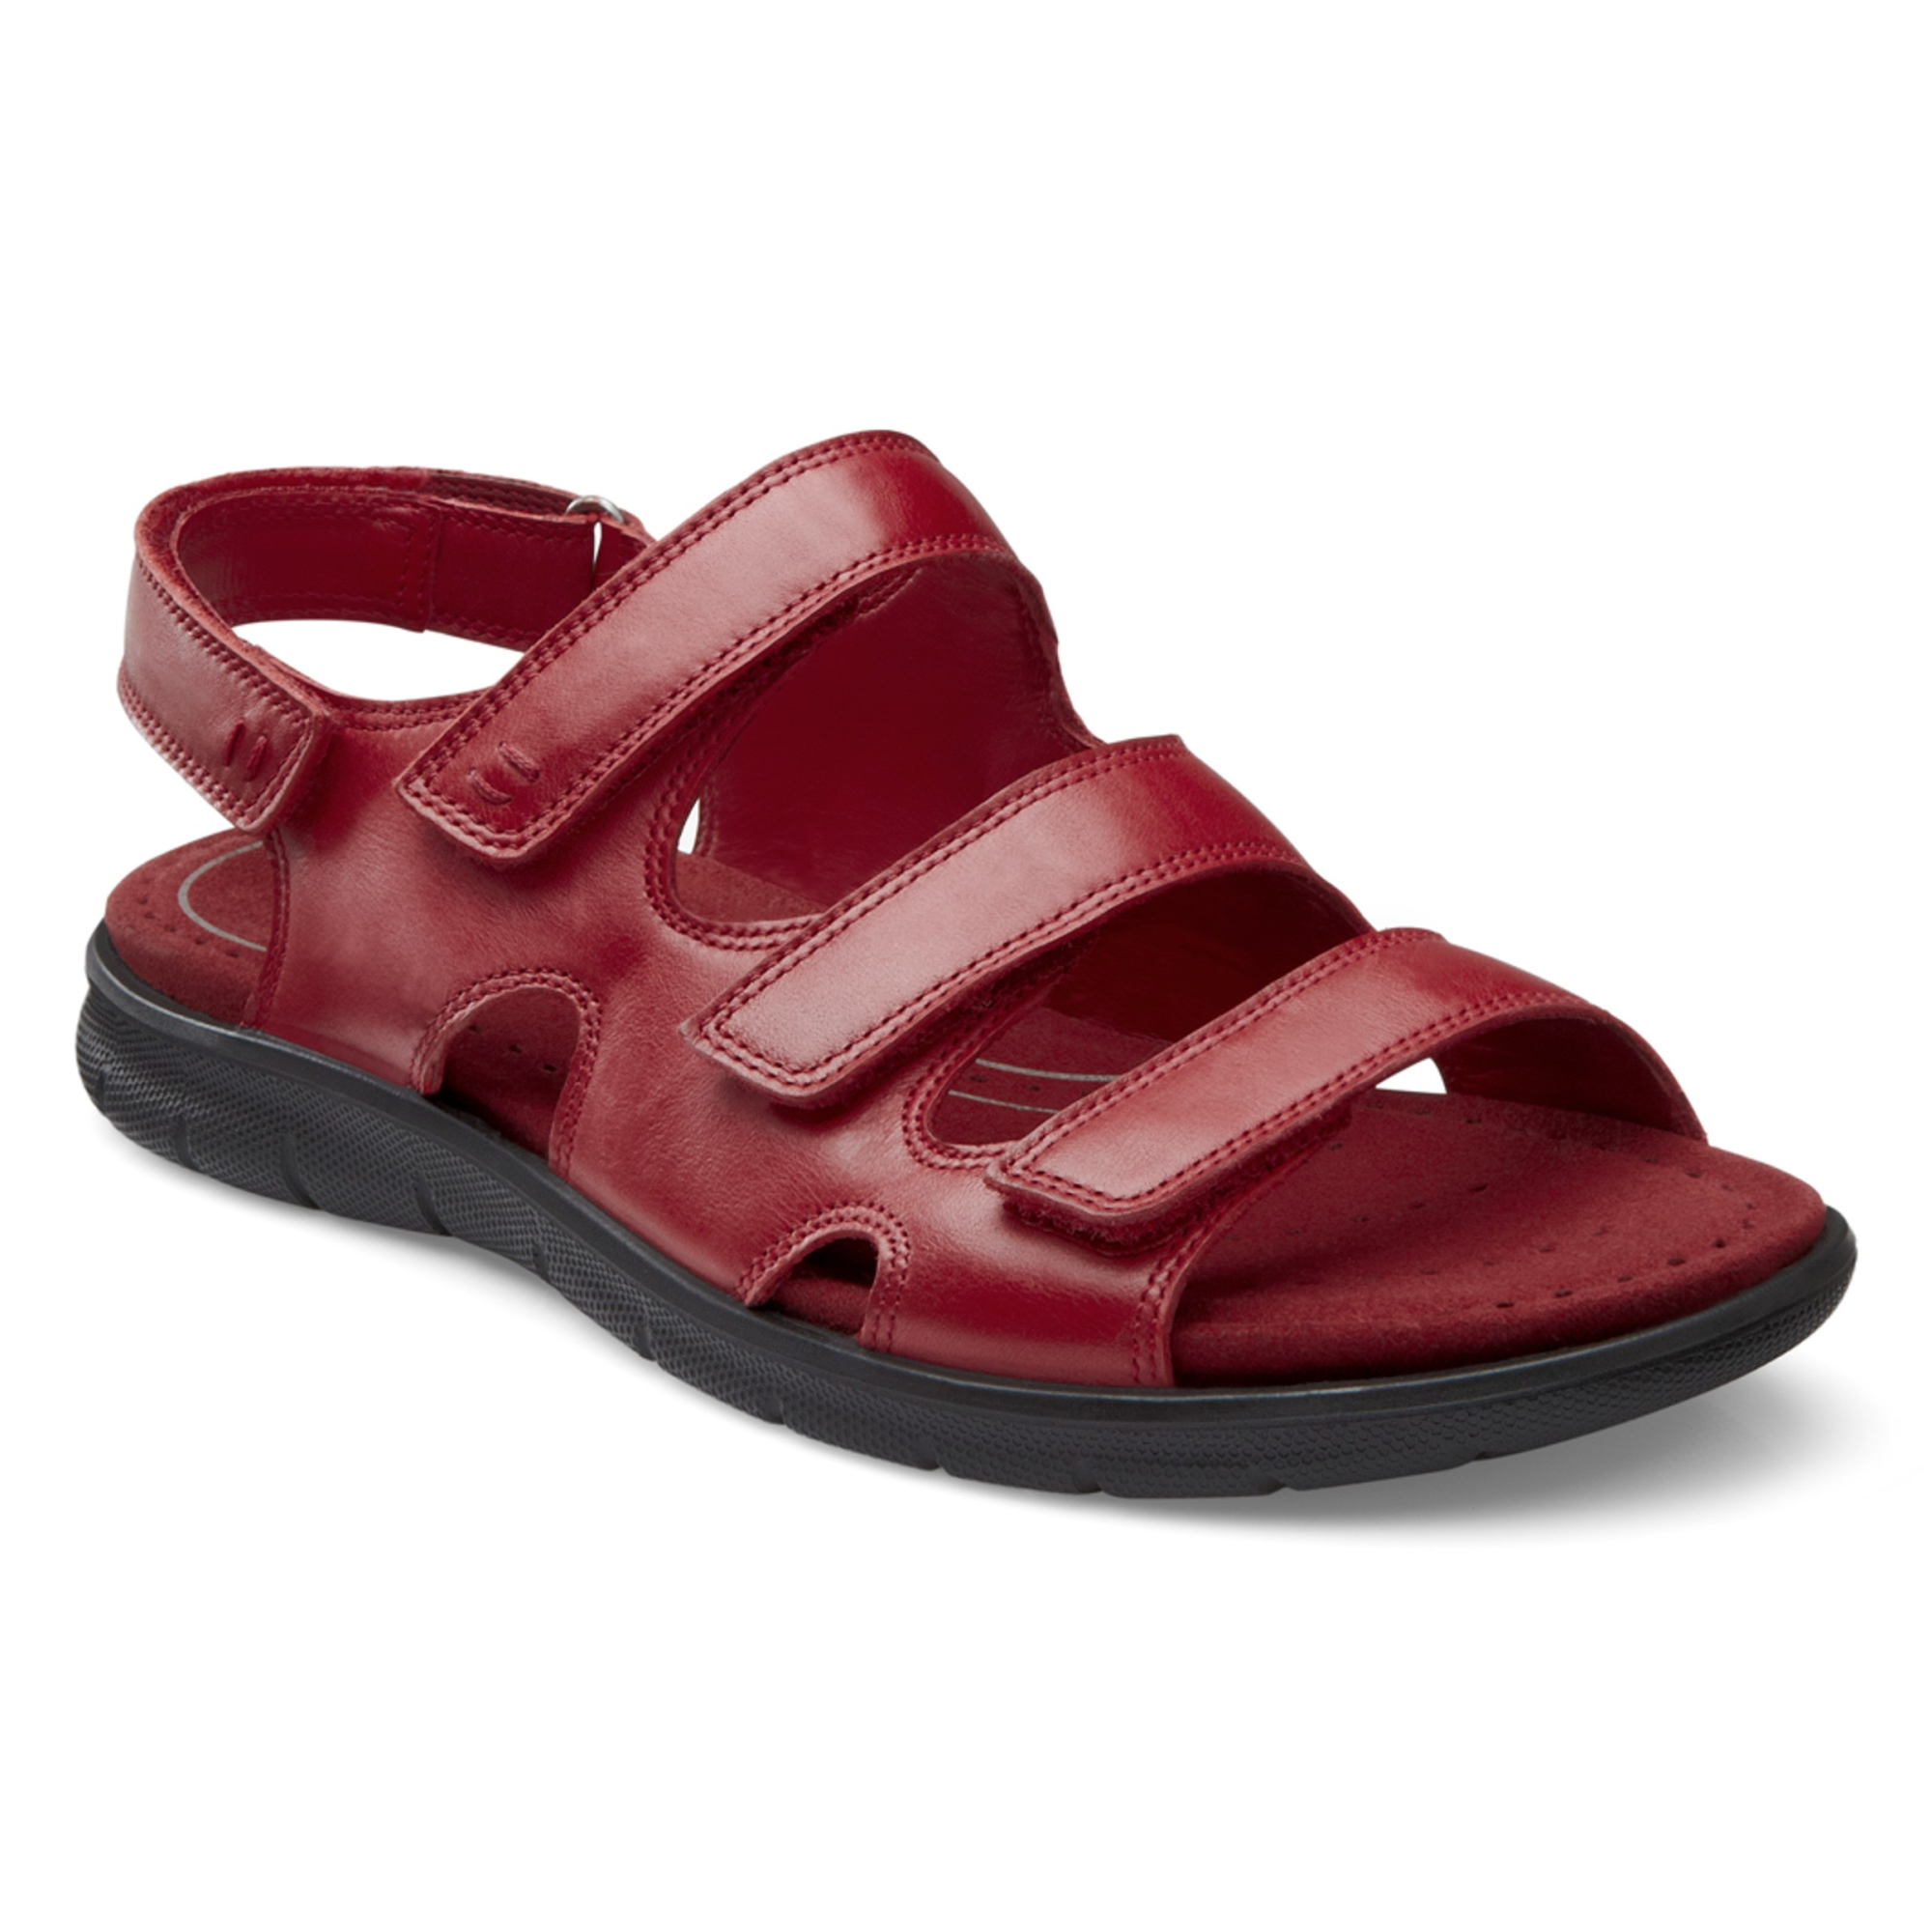 Ecco Babett Sandal 3 Strap 35 - Products - Veryk Mall - Mall, many quick response, safe your money!